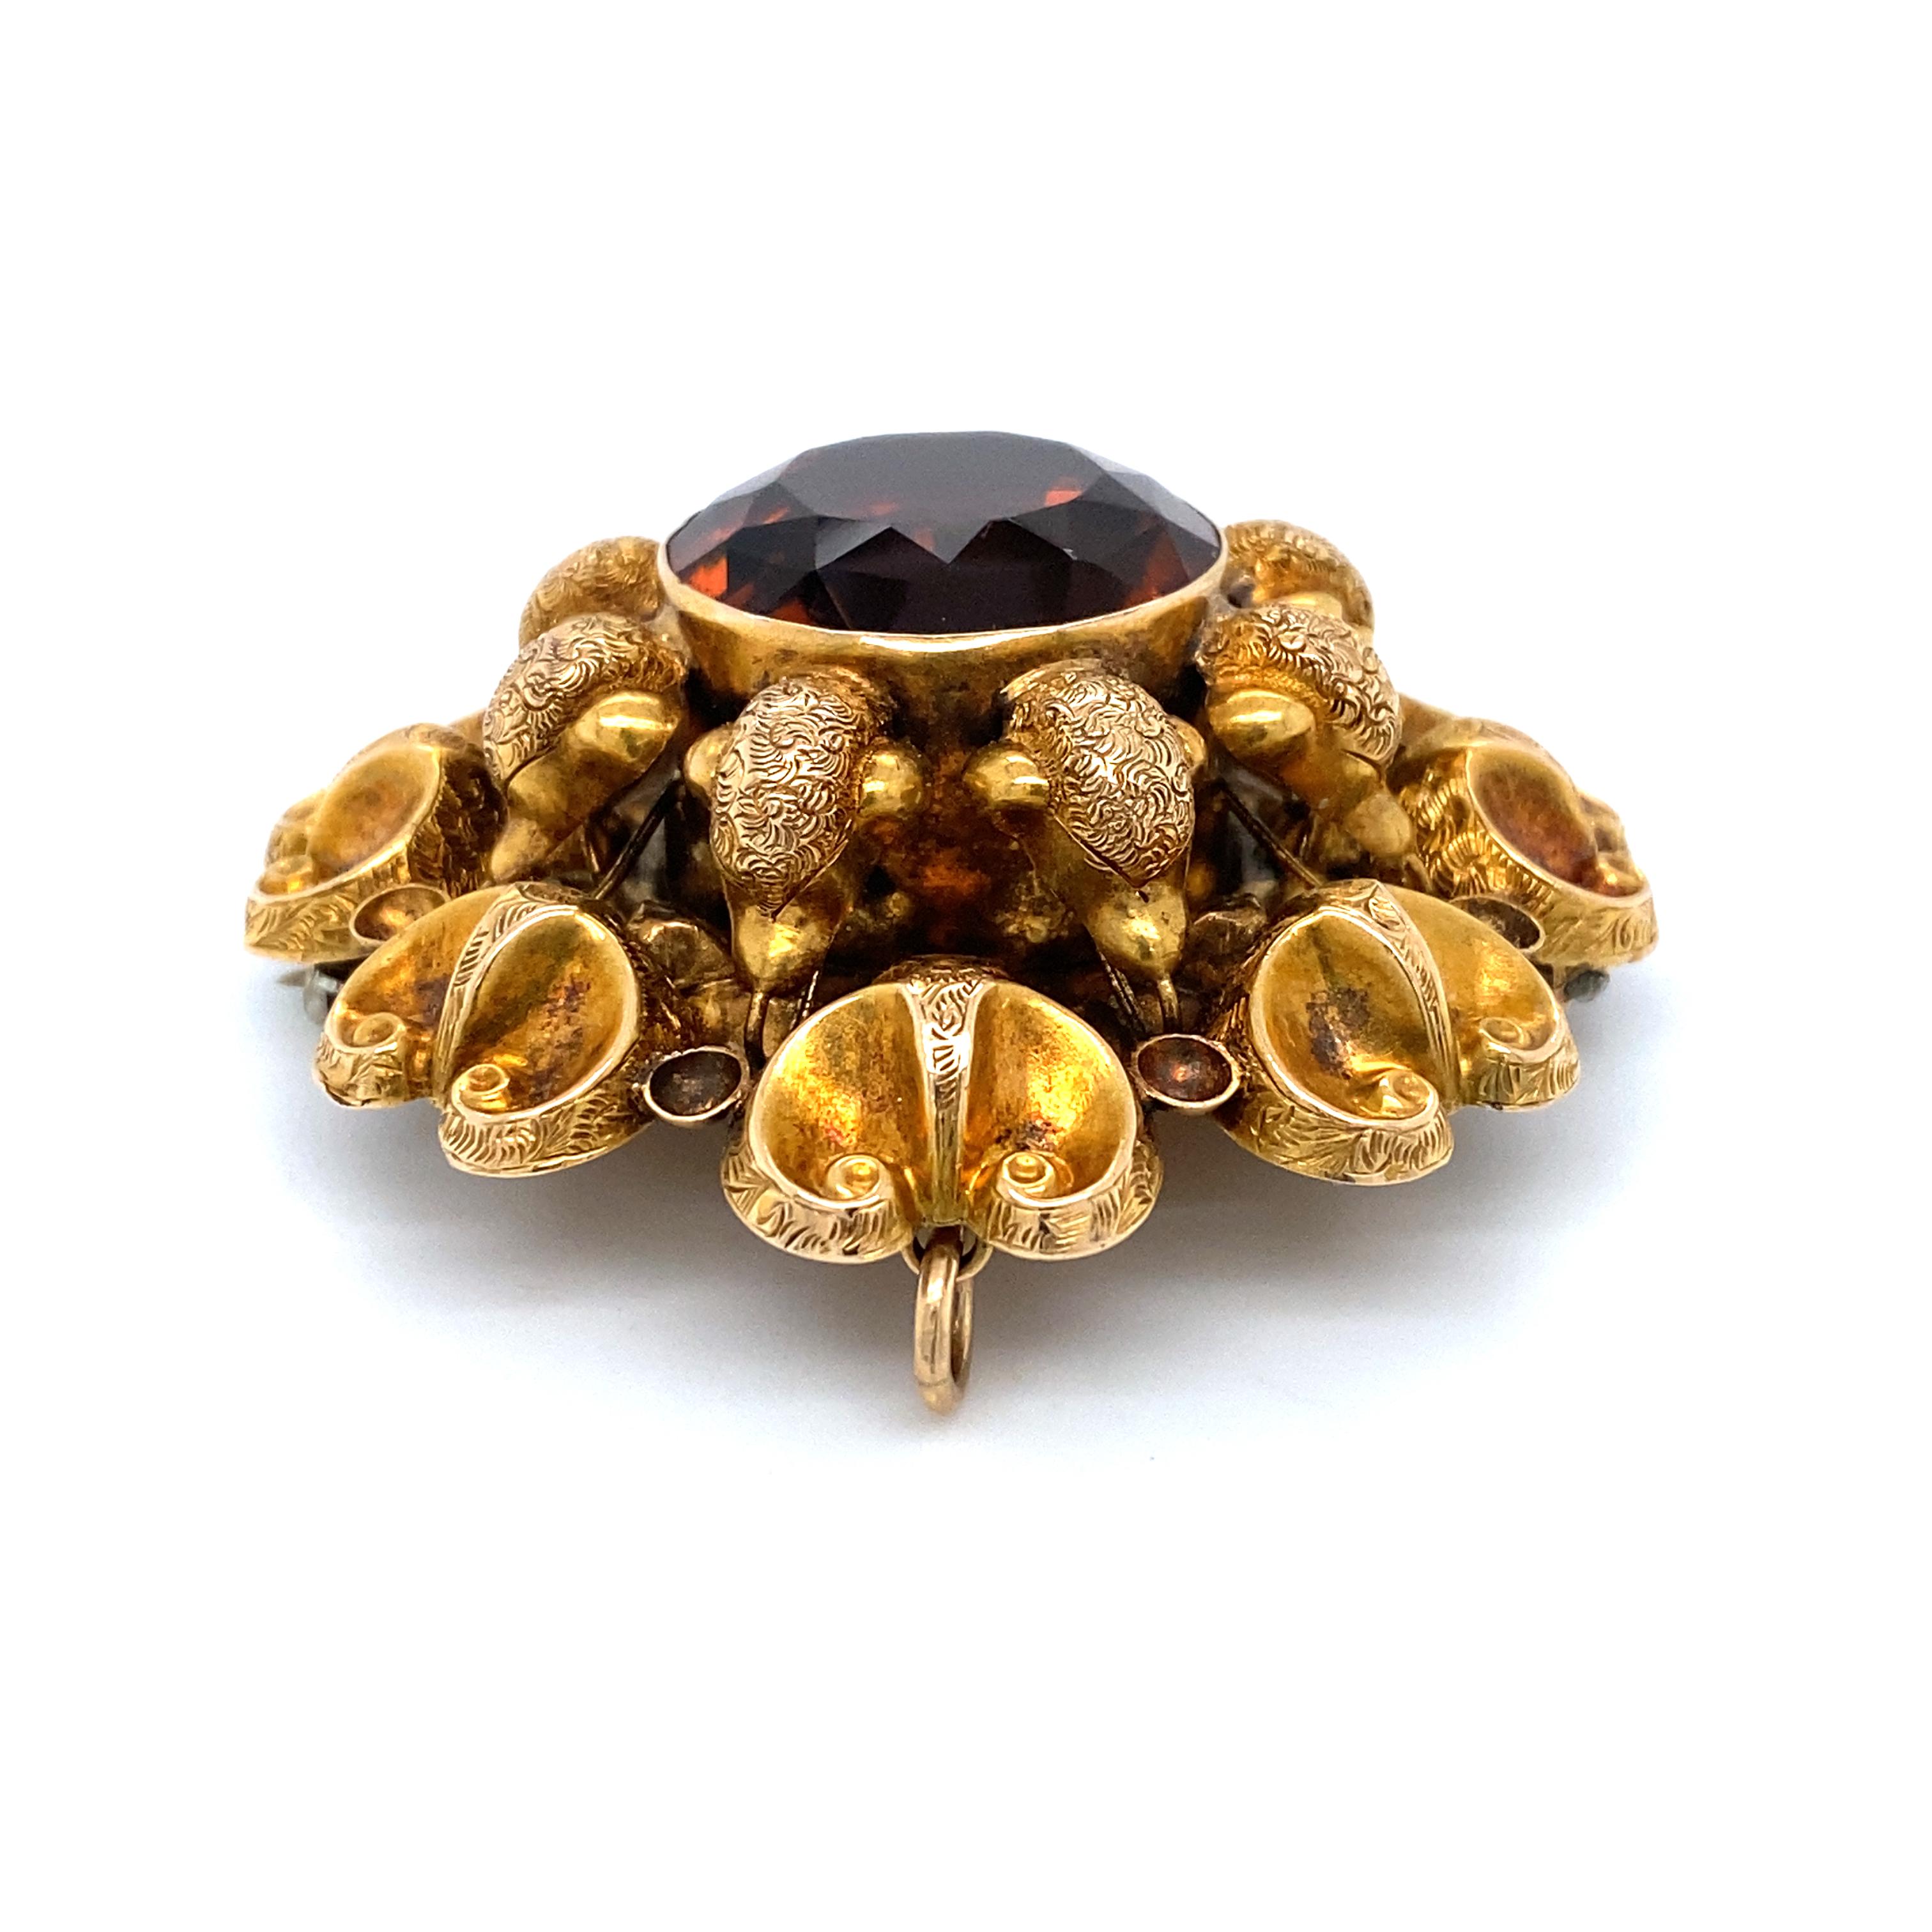 Item Details: This unique brooch is a beautiful Victorian era creation with a motif that evokes a ram's head. The citrine in the venter is a deep orange-brown and is excellent quality.

Circa: 1890s
Metal Type: 15 Karat Gold
Weight: 18.5 grams
Size: